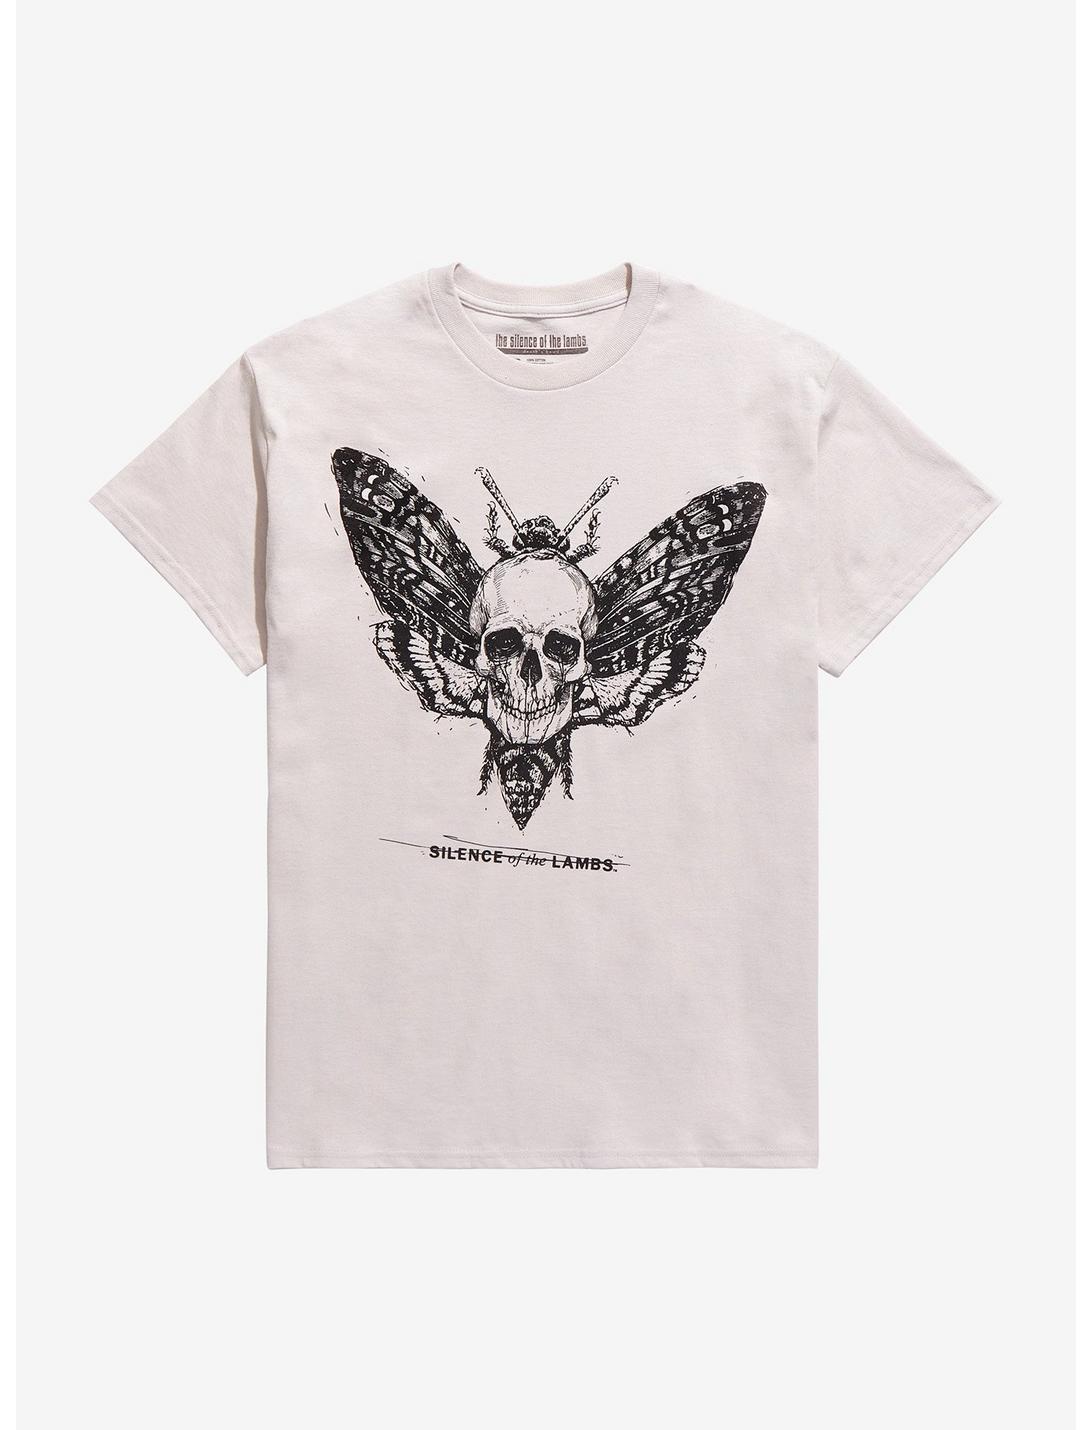 The Silence Of The Lambs Death's-Head Moth T-Shirt, BLACK, hi-res